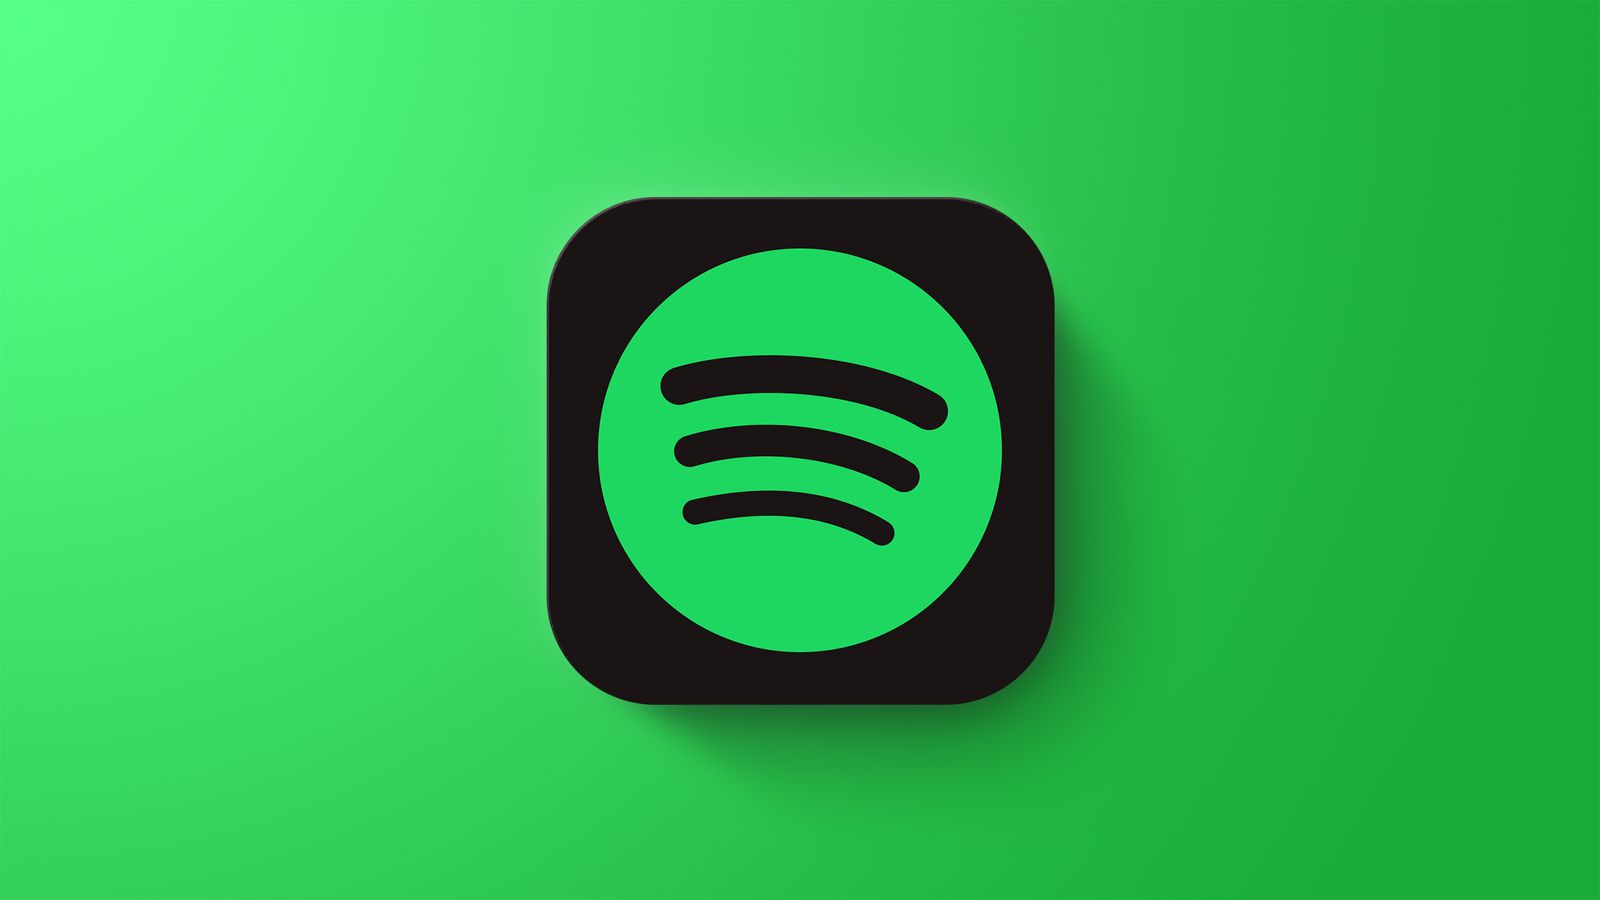 Google Admits: Spotify Pays No Play Store Fees Through Secret Deal